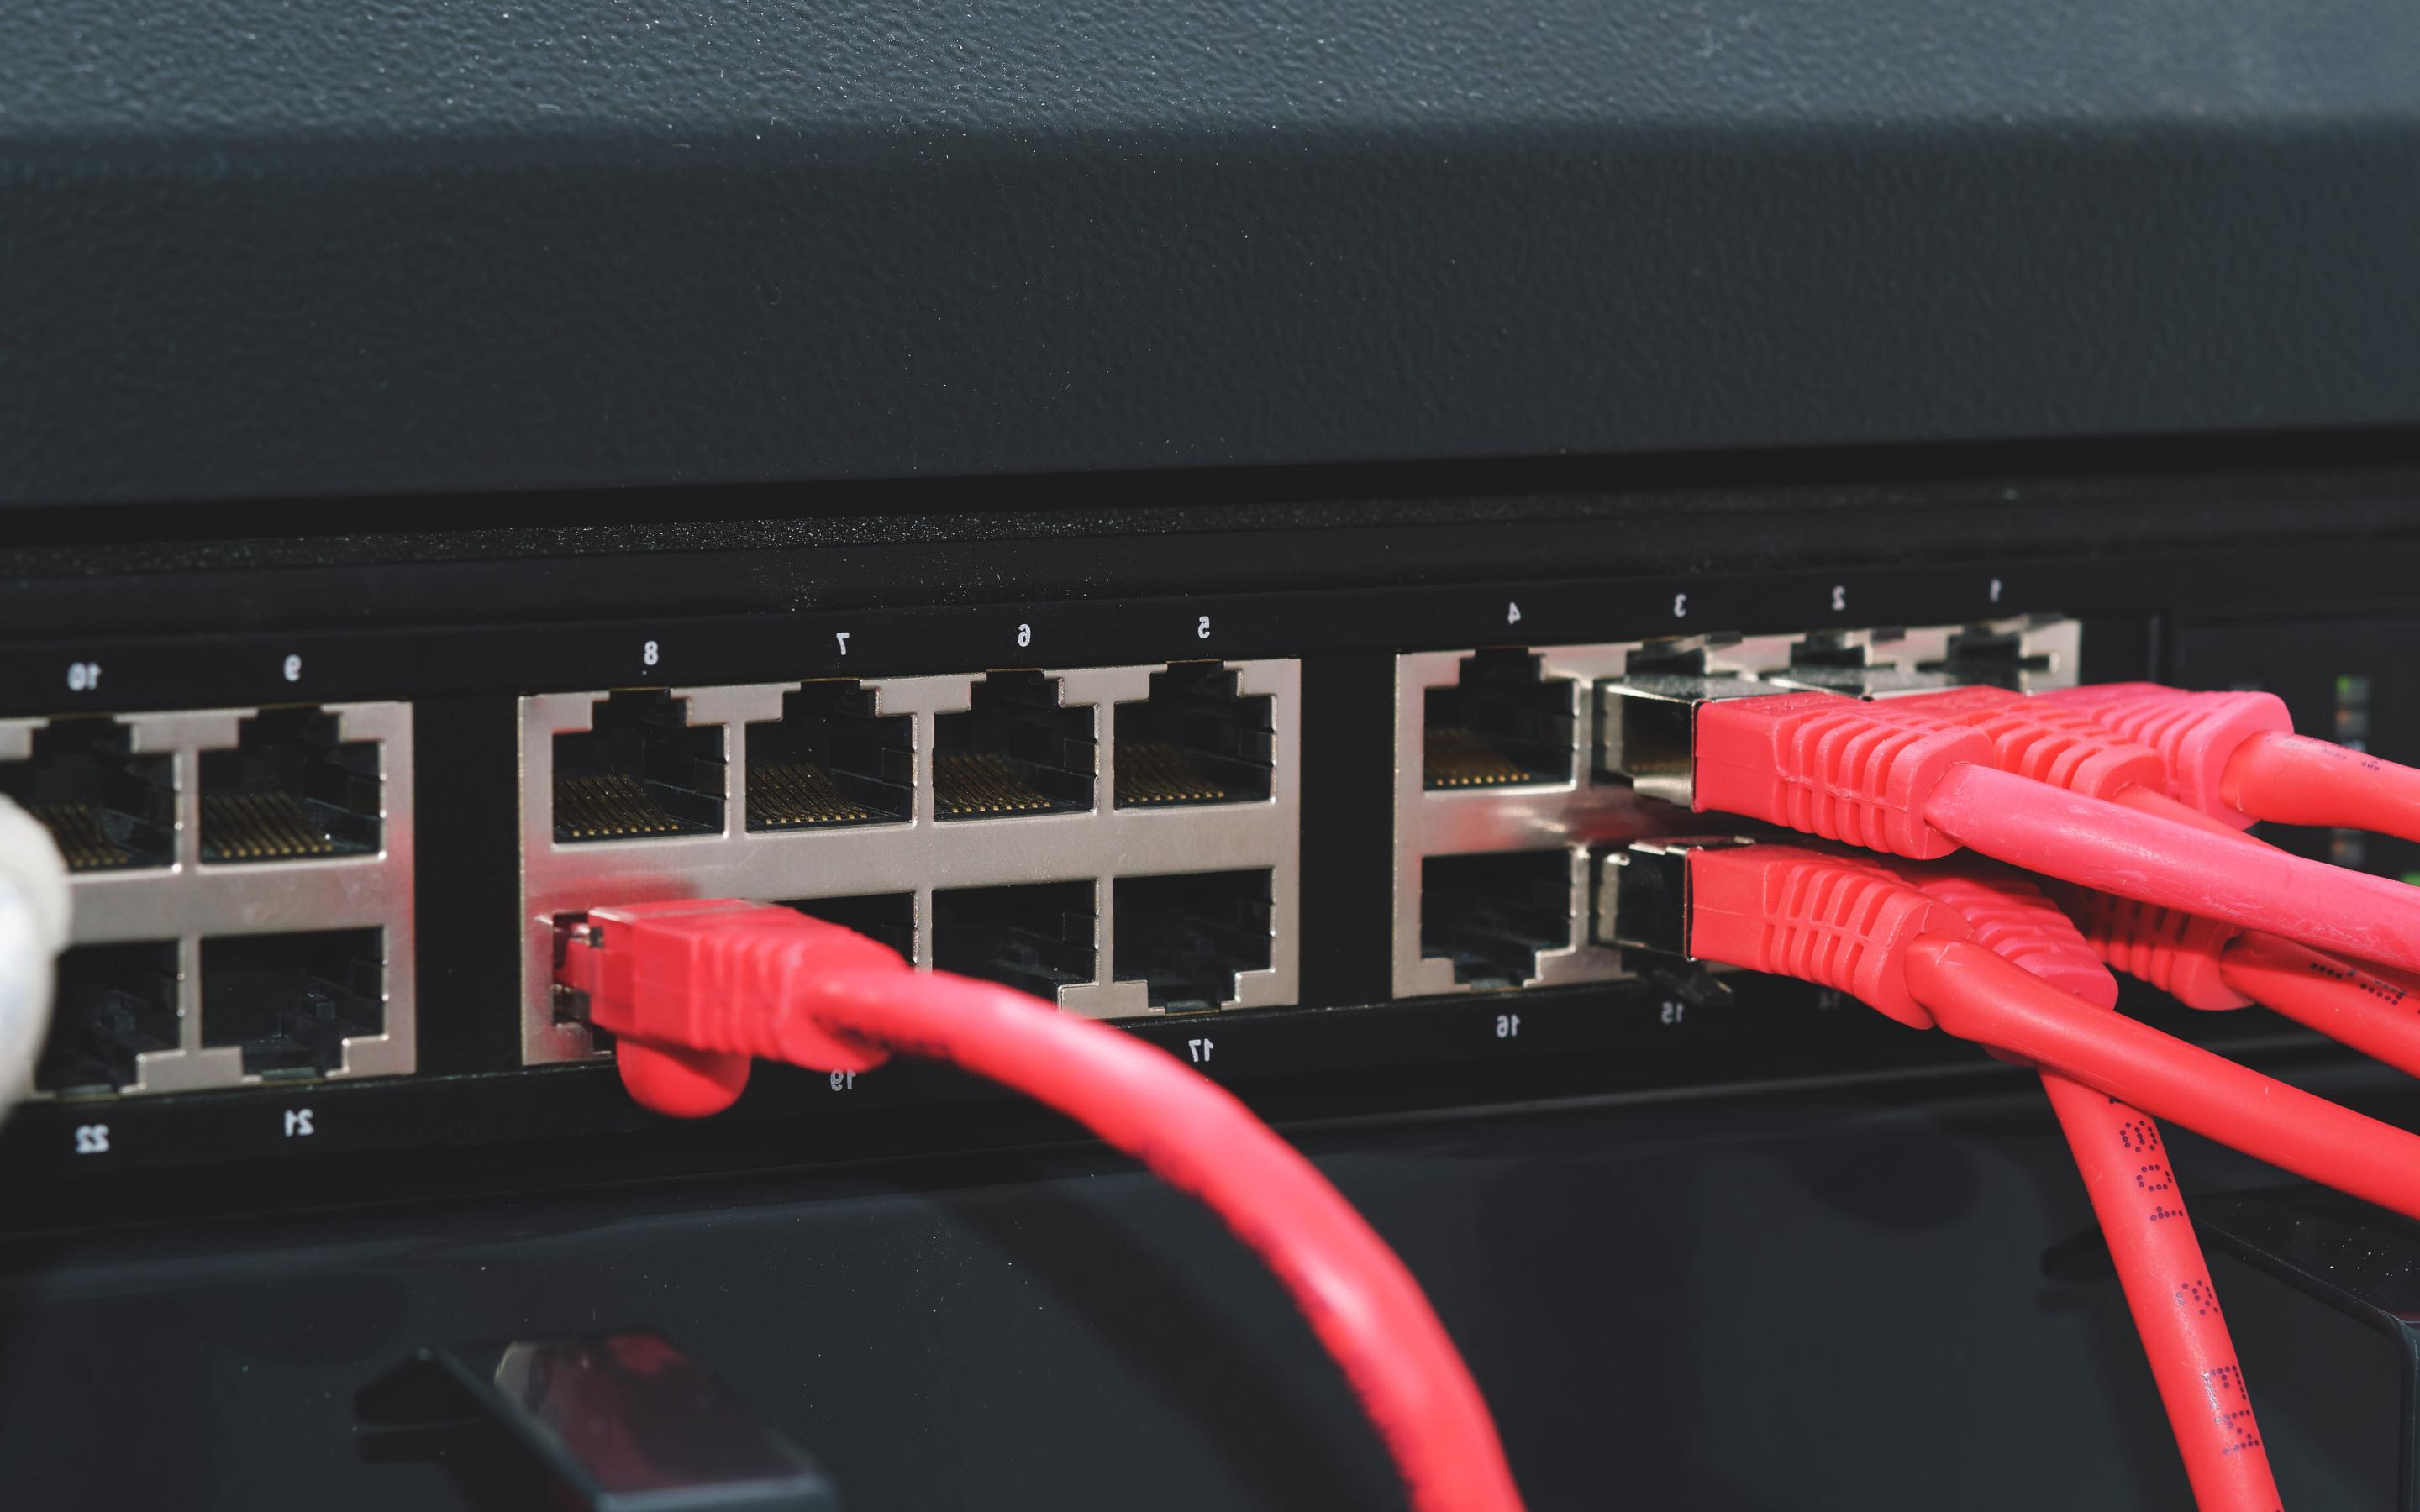 Networking cables